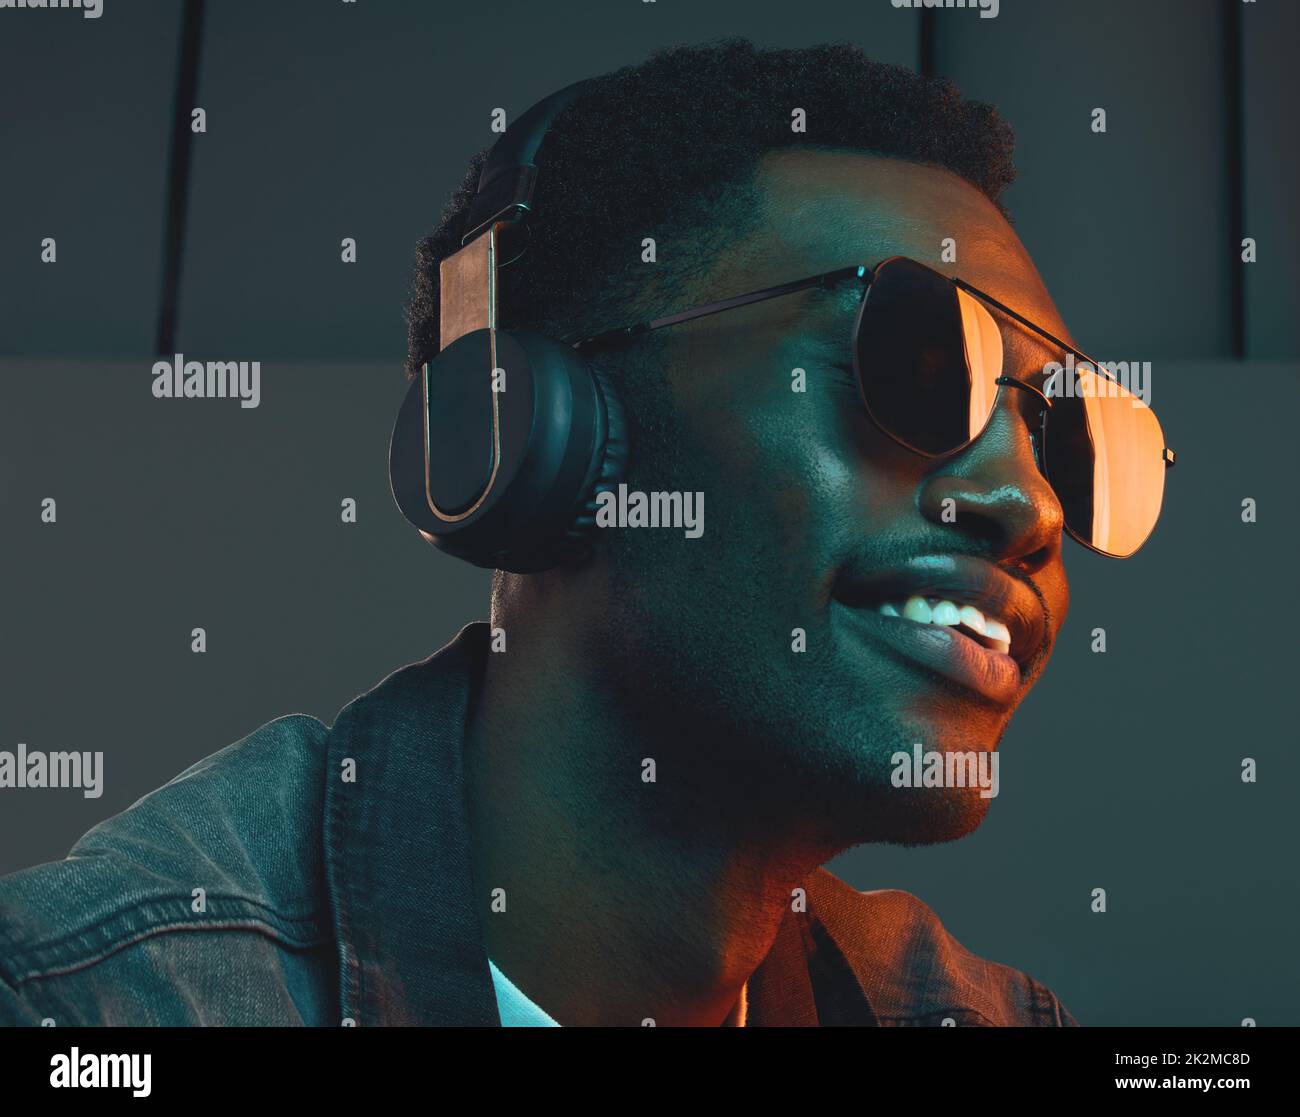 Im always in a mood, a good one. Studio shot of a man wearing headphones and sunglasses. Stock Photo